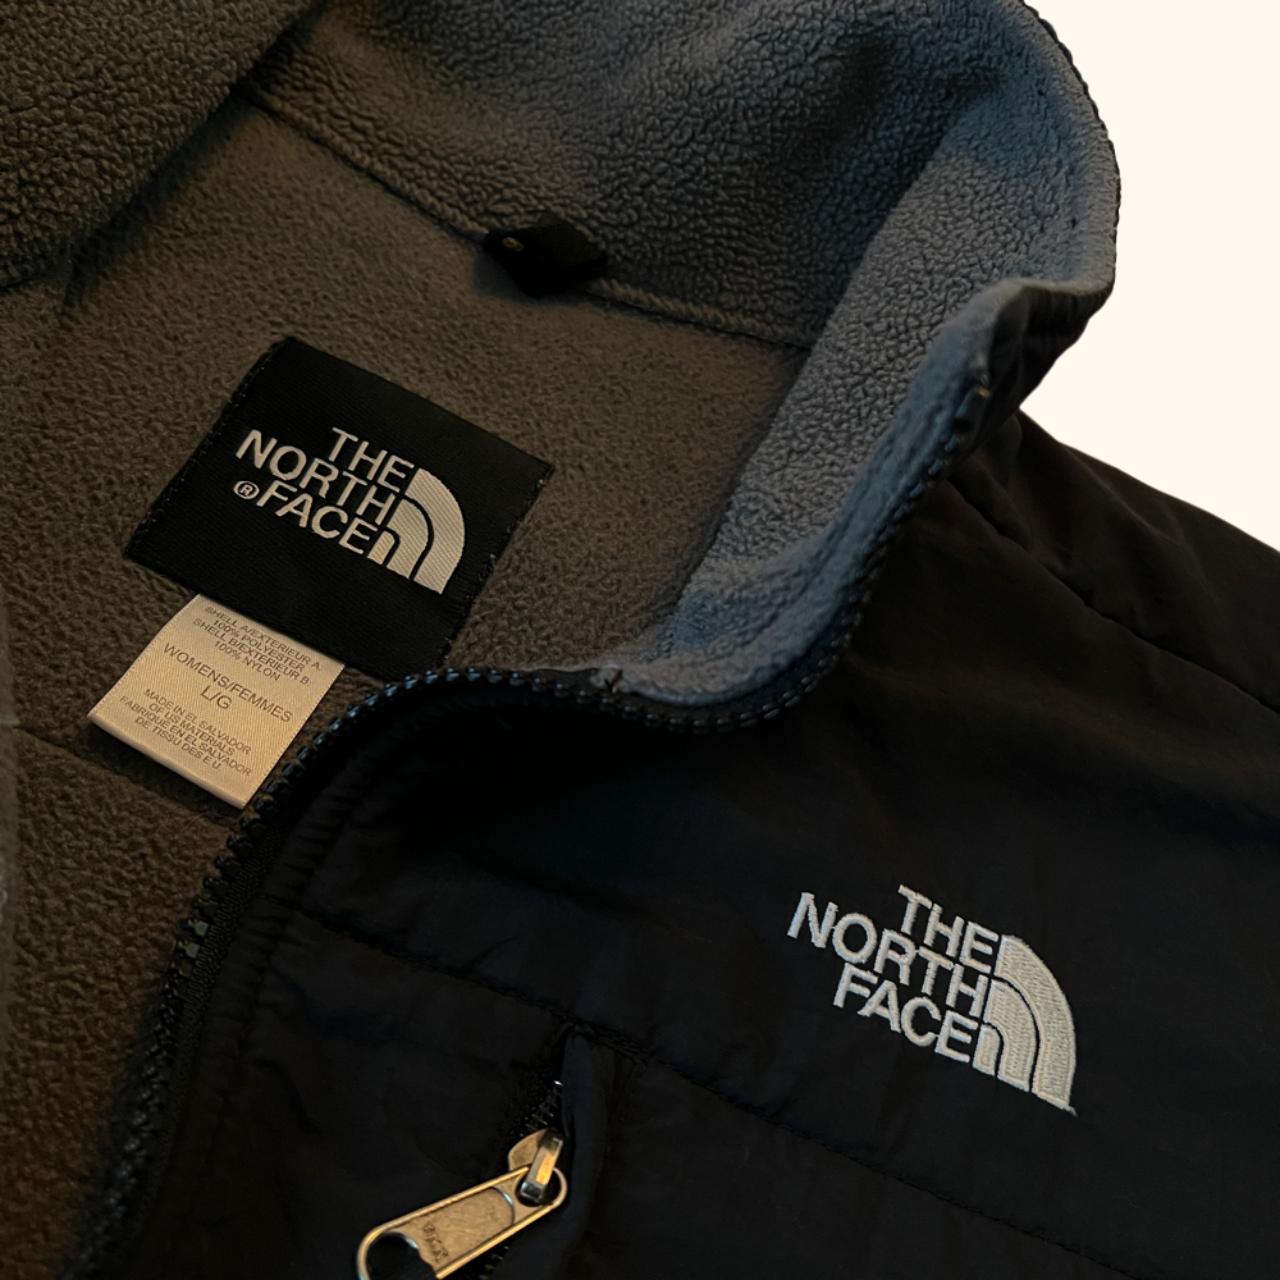 The North Face Men's Black and Grey Jacket (2)